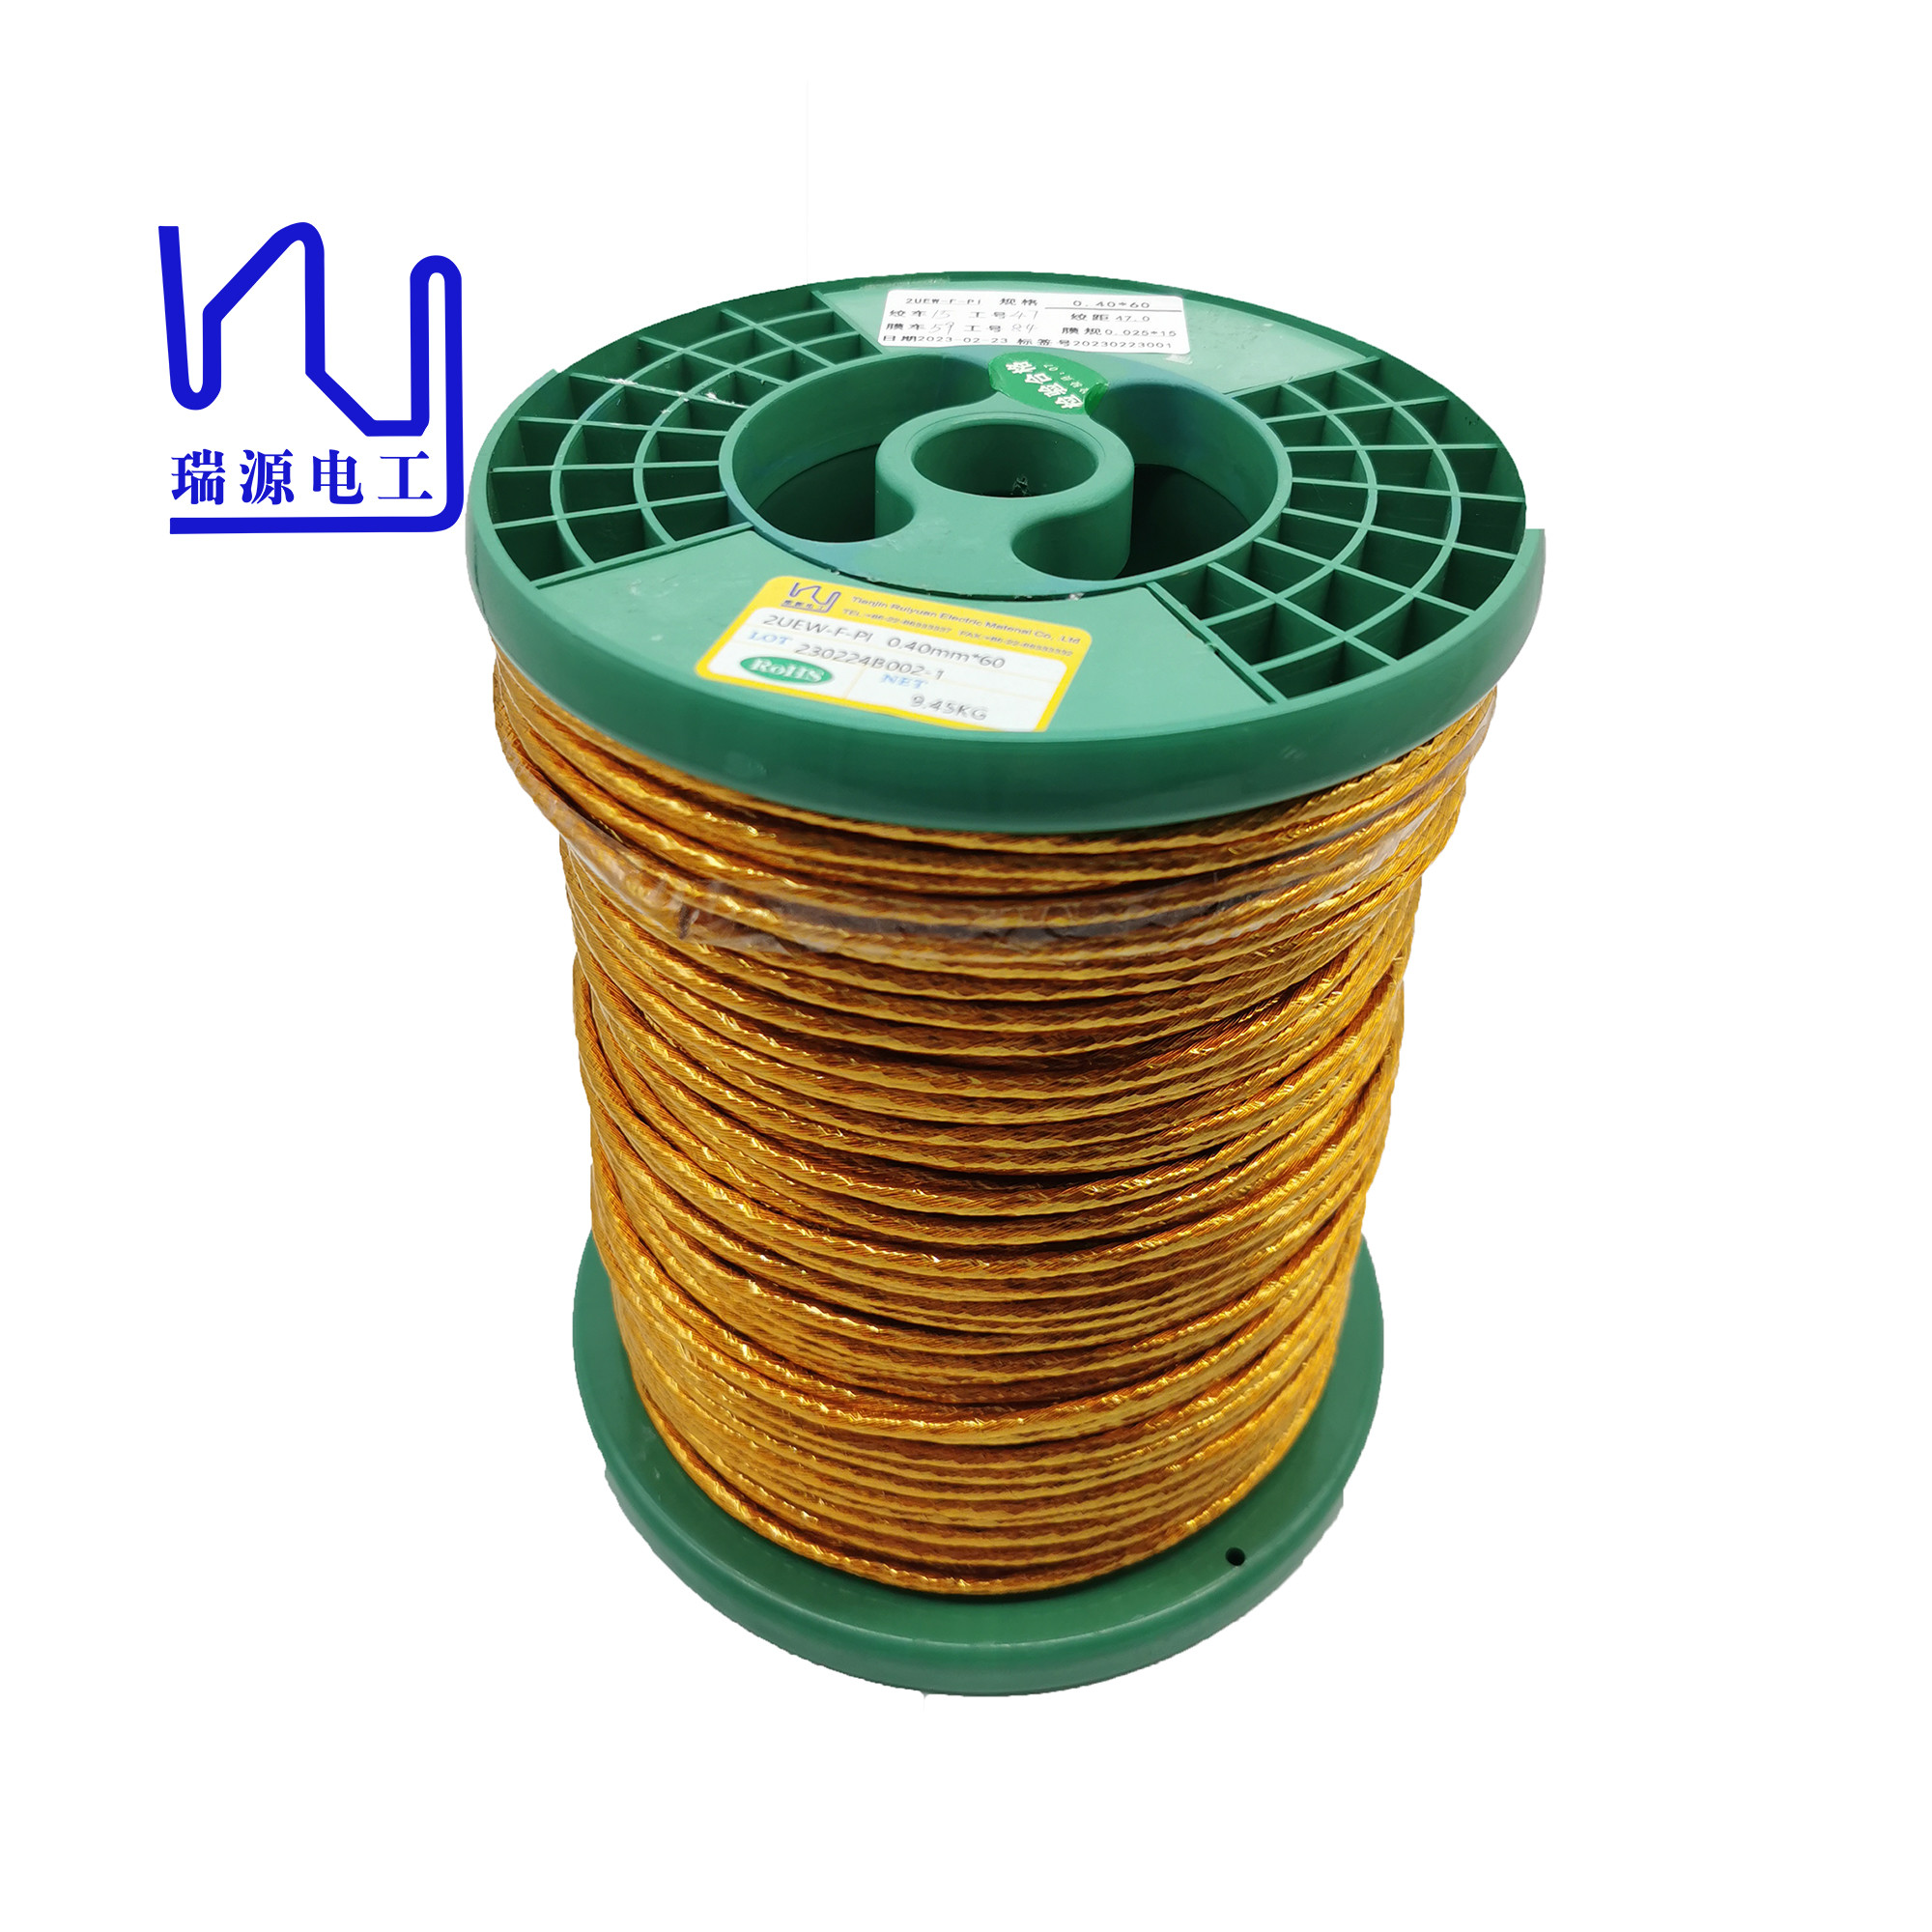 0.4mm 0.5mm Pi Taped Copper Wire With Enamel For Transformer / Motor